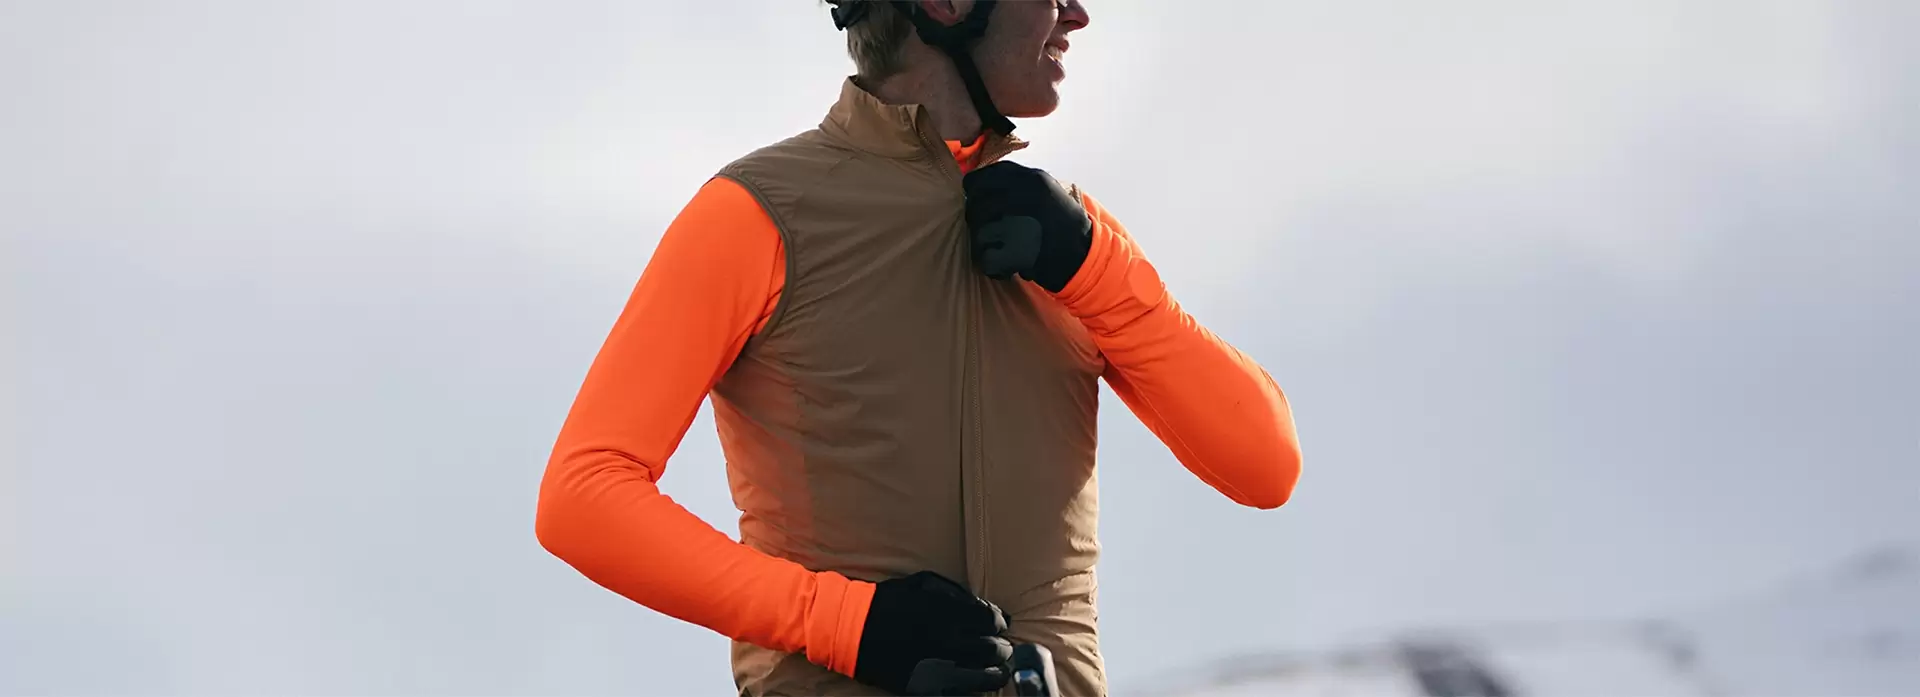 Winter Jackets and Vests cycling